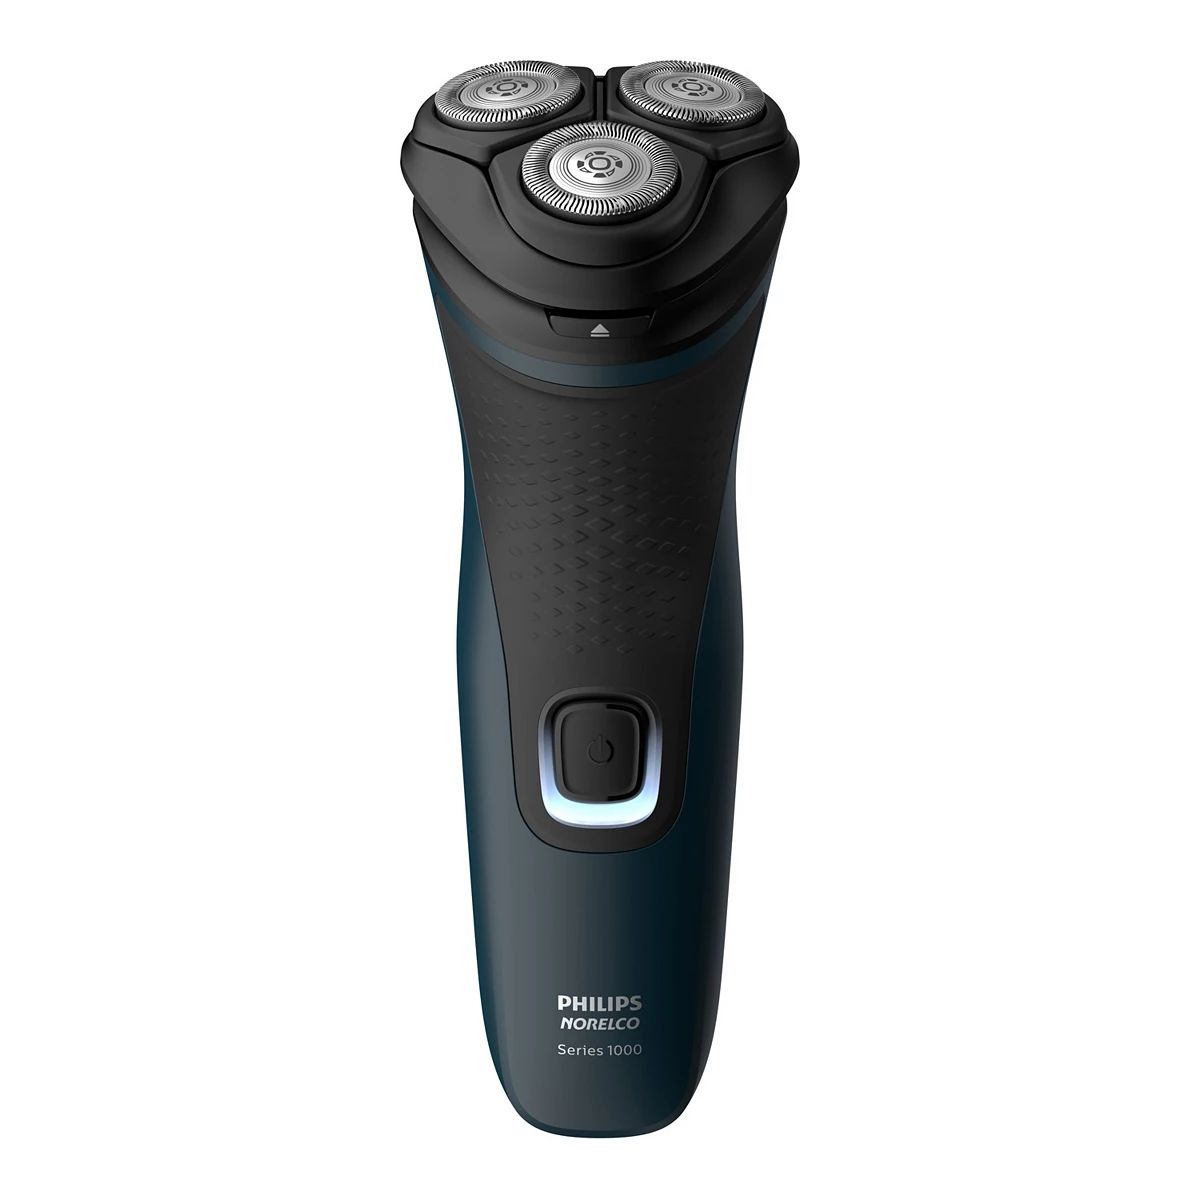 Philips Norelco Shaver 2100 Electric Shaver | Kohl's